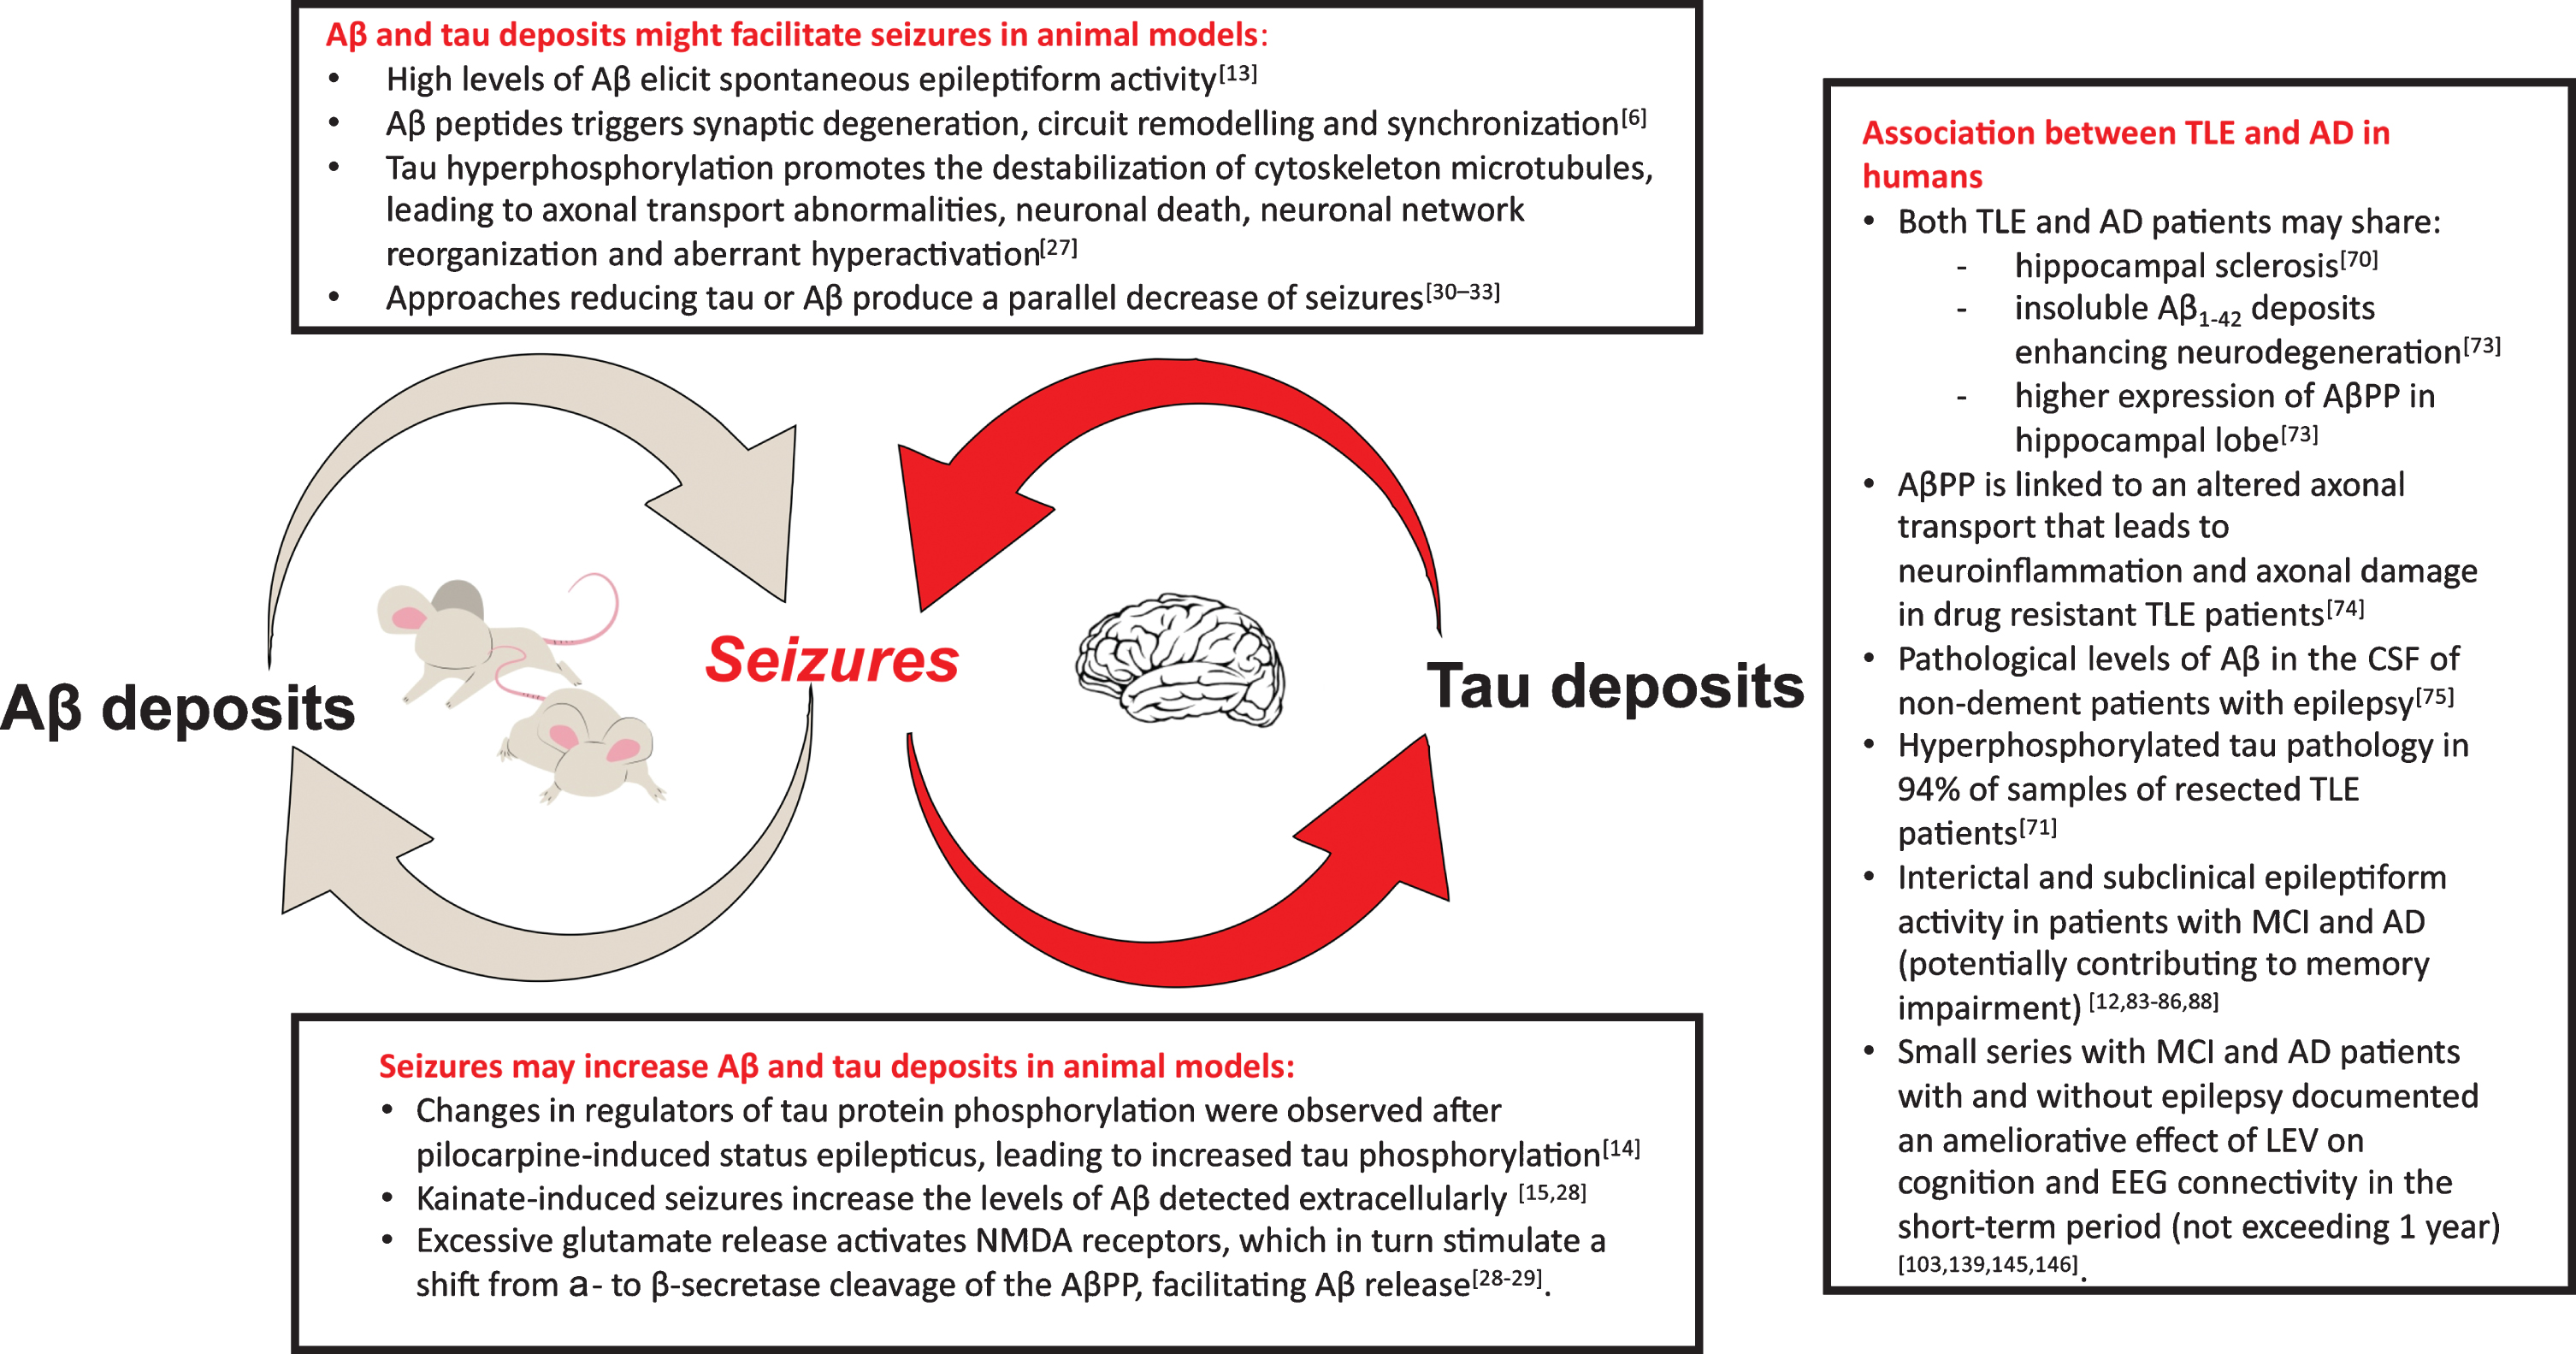 In the figure, the key points of the mutual relationship between epilepsy and Alzheimer’s disease (AD) are displayed. The experimental evidence in animal models has clearly evidenced the potential presence of a “vicious loop”: Aβ and tau deposits may be cause of seizures (box on the top) and seizures lead to increase in brain Aβ deposits and tau phosphorylation (box at the bottom). In the box on the right, the main findings supporting the association between temporal lobe epilepsy (TLE) and AD in humans are summarized. Aβ, amyloid-β; AβPP, amyloid-β protein precursor; NMDA, N-methyl-D-aspartate; CSF, cerebrospinal fluid; MCI, mild cognitive impairment; LEV, Levetiracetam.